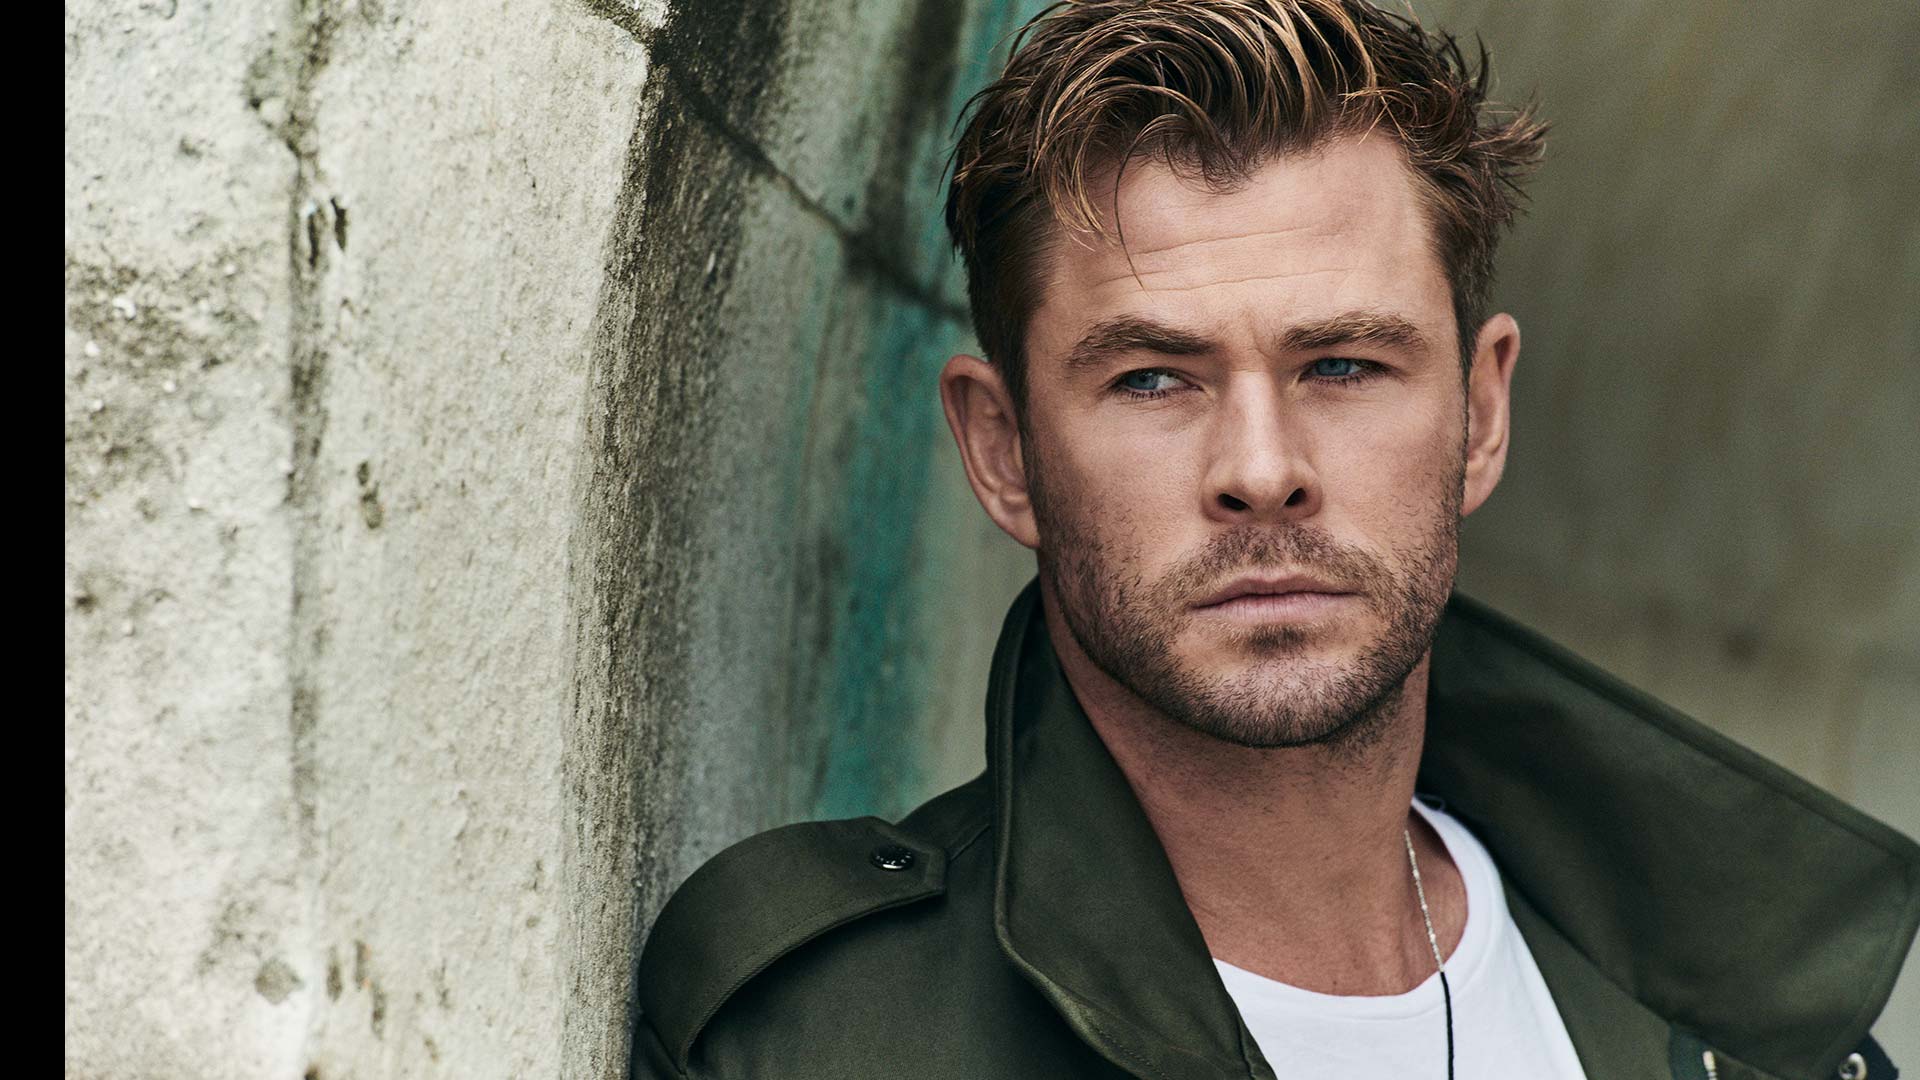 Chris Hemsworth is the superhero, the man and the father we would